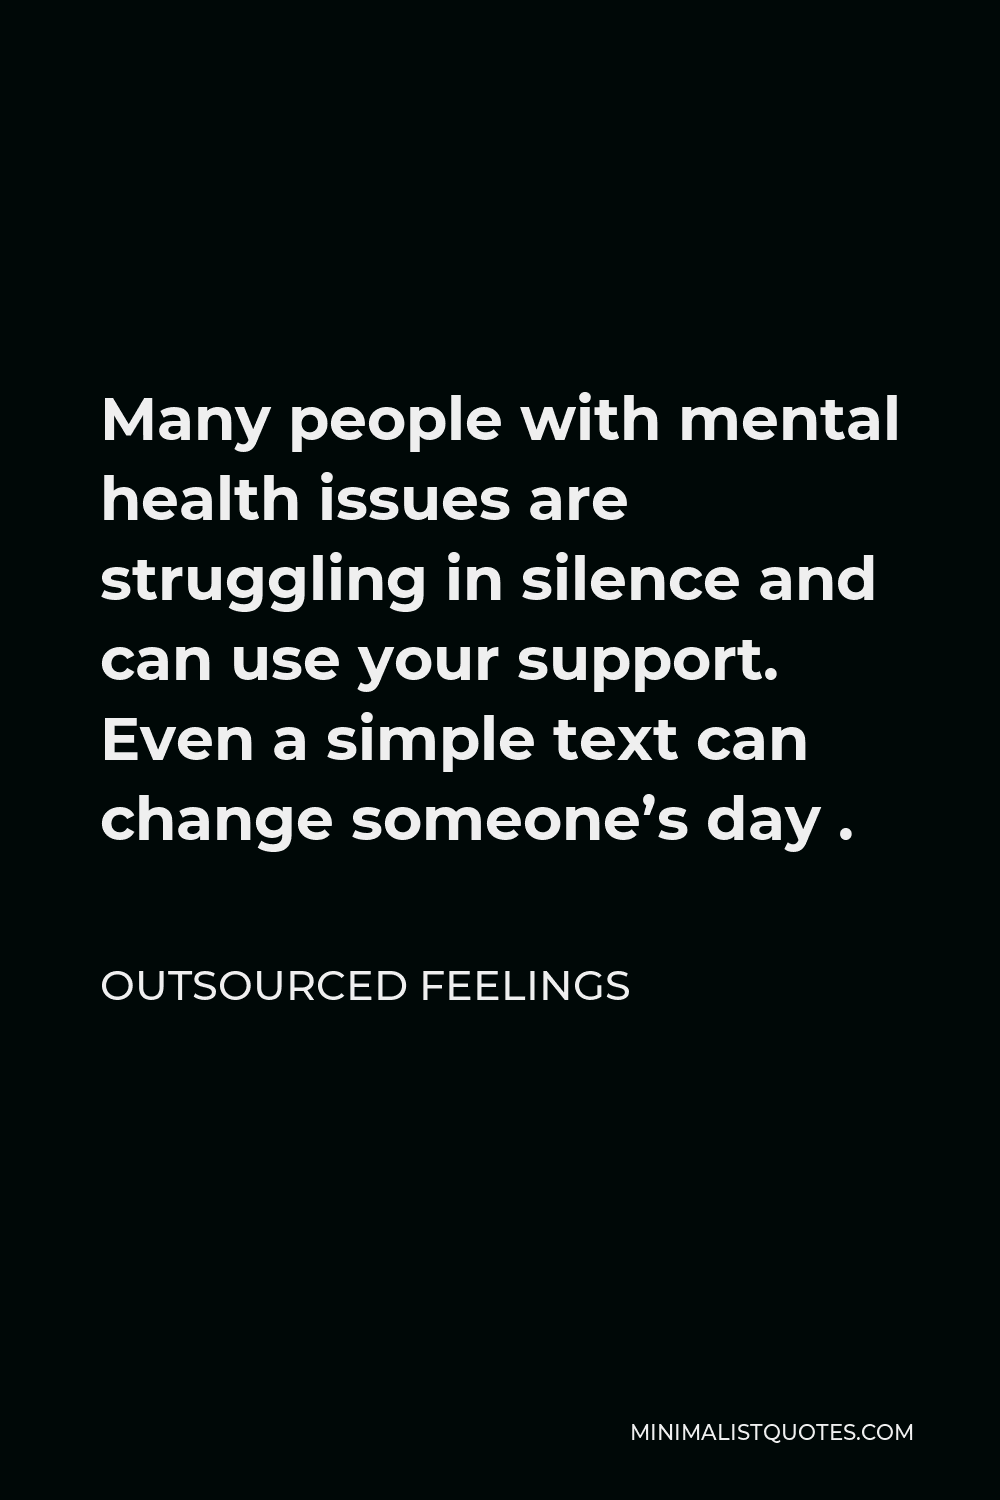 Outsourced Feelings Quote - Many people with mental health issues are struggling in silence and can use your support. Even a simple text can change someone’s day .